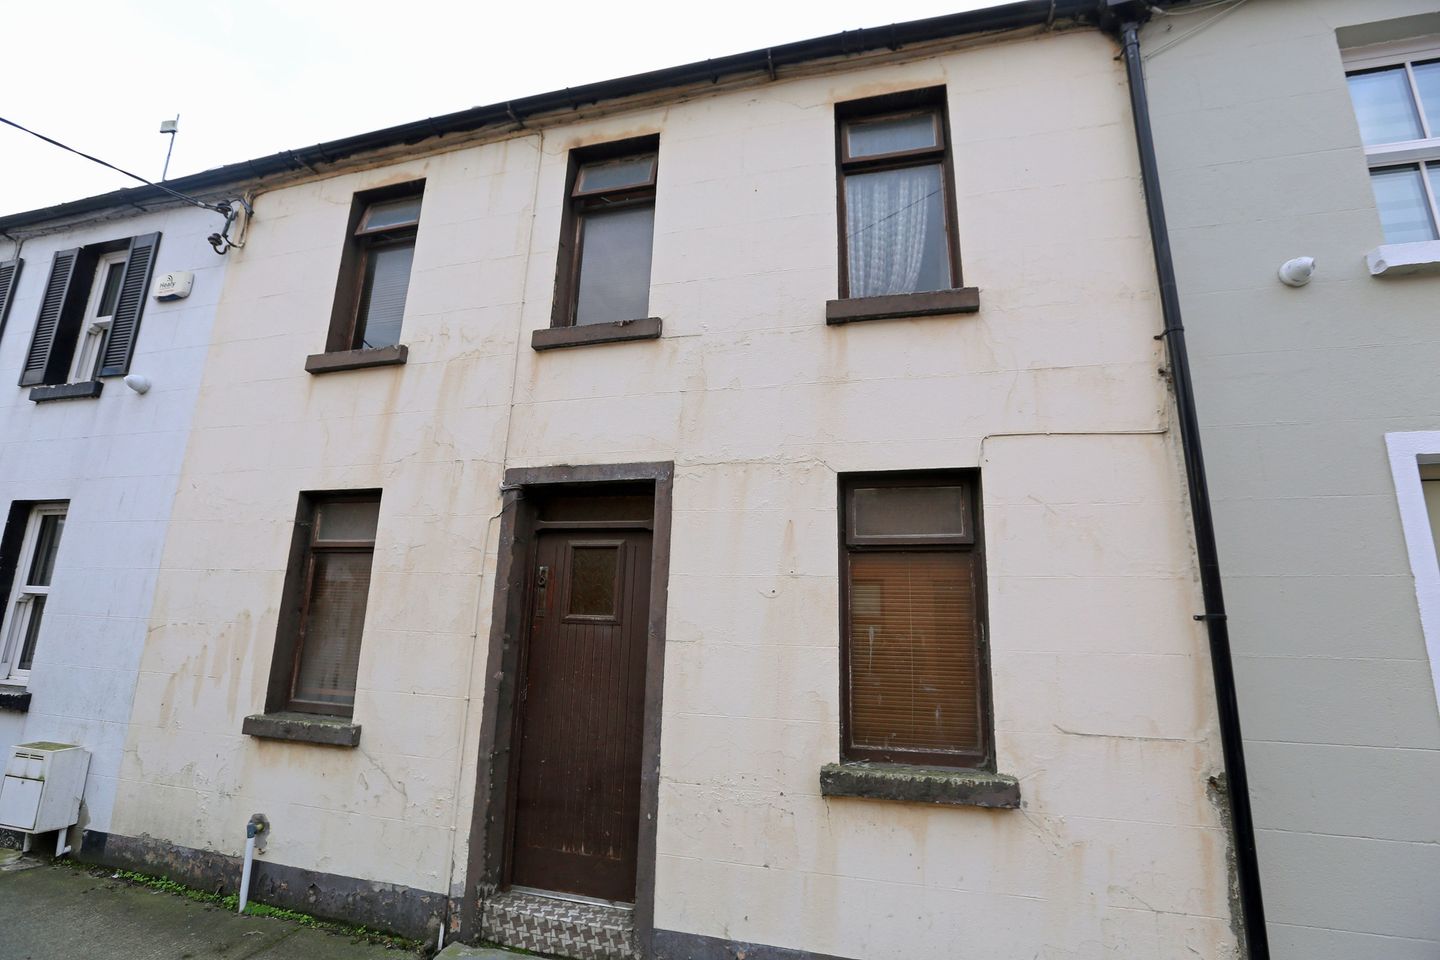 118 Chord Road, Drogheda, Co. Louth